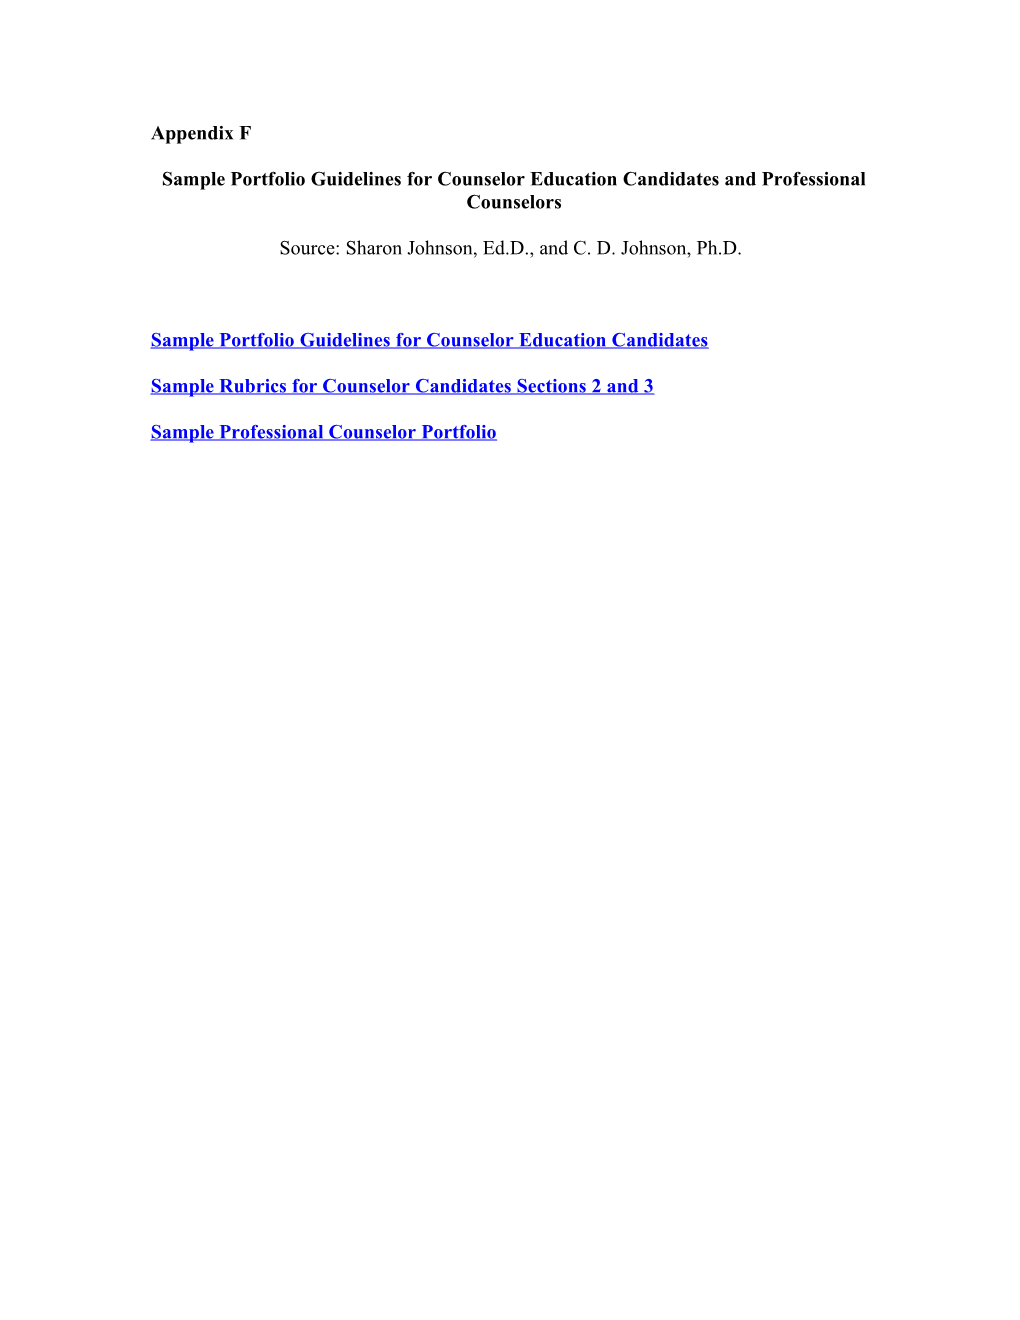 Sample Portfolio Guidelines for Counselor Education Candidates and Professional Counselors